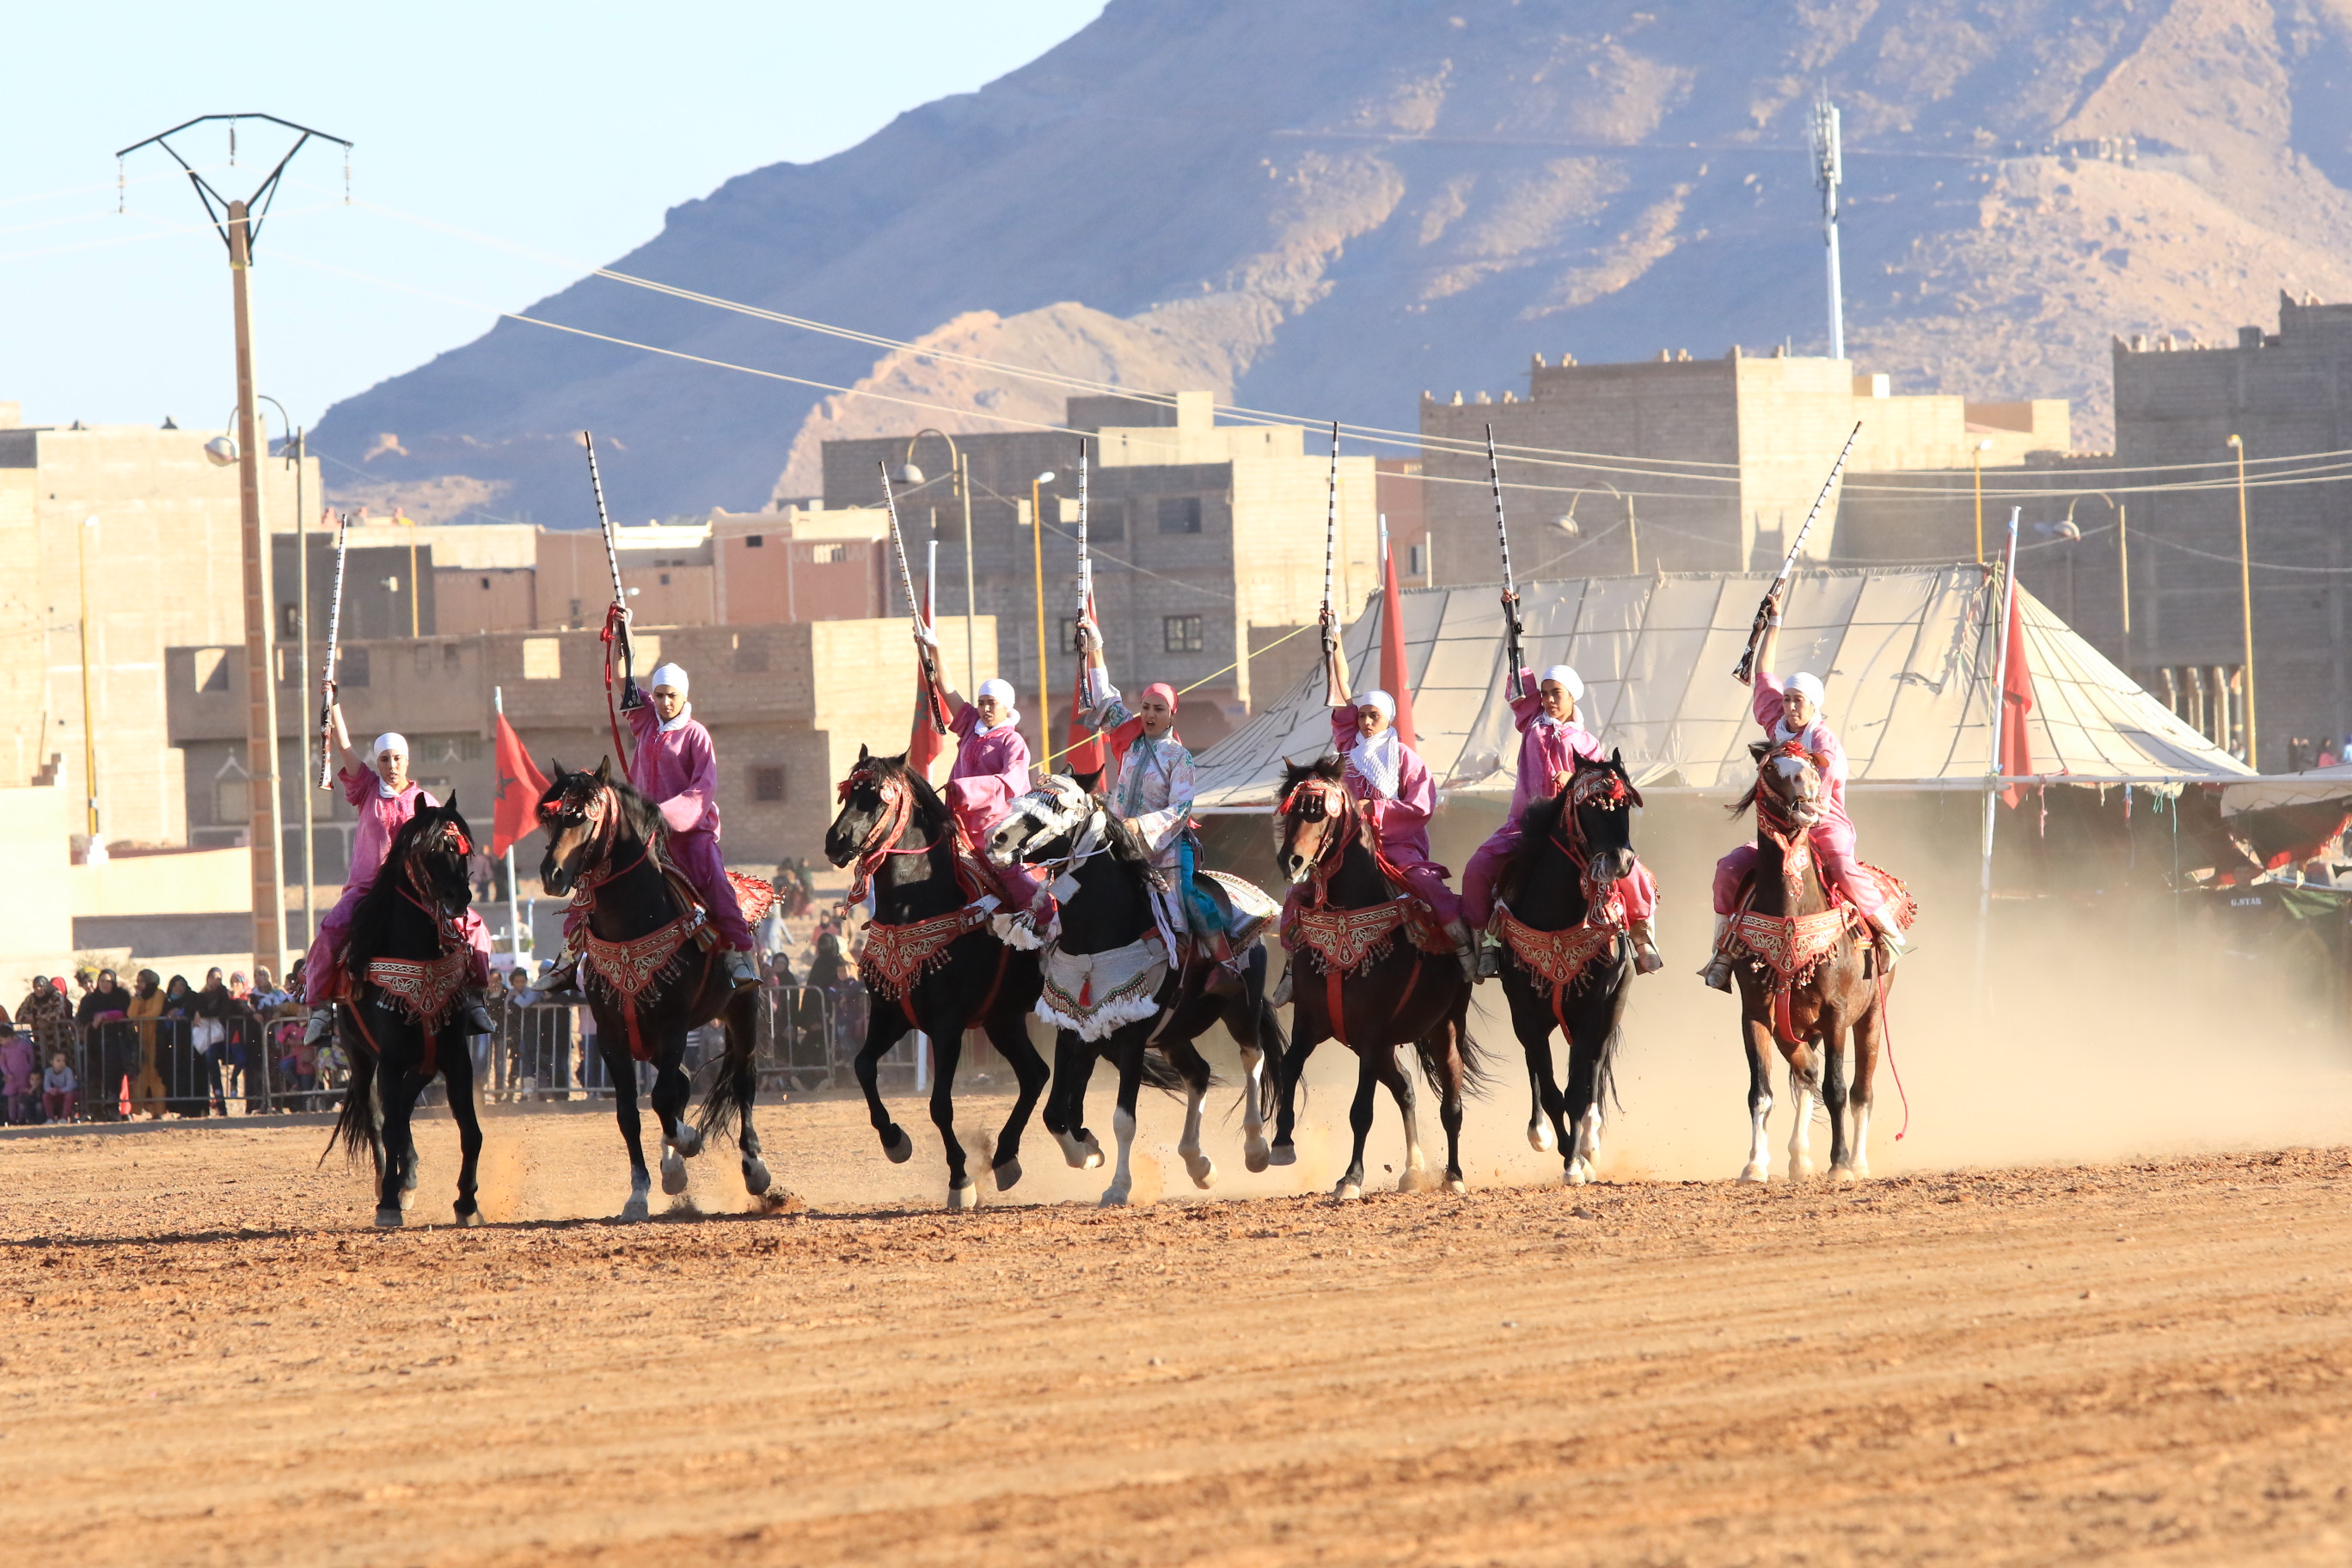 Group of women on horses gallop together. Dust is being kicked up behind them.